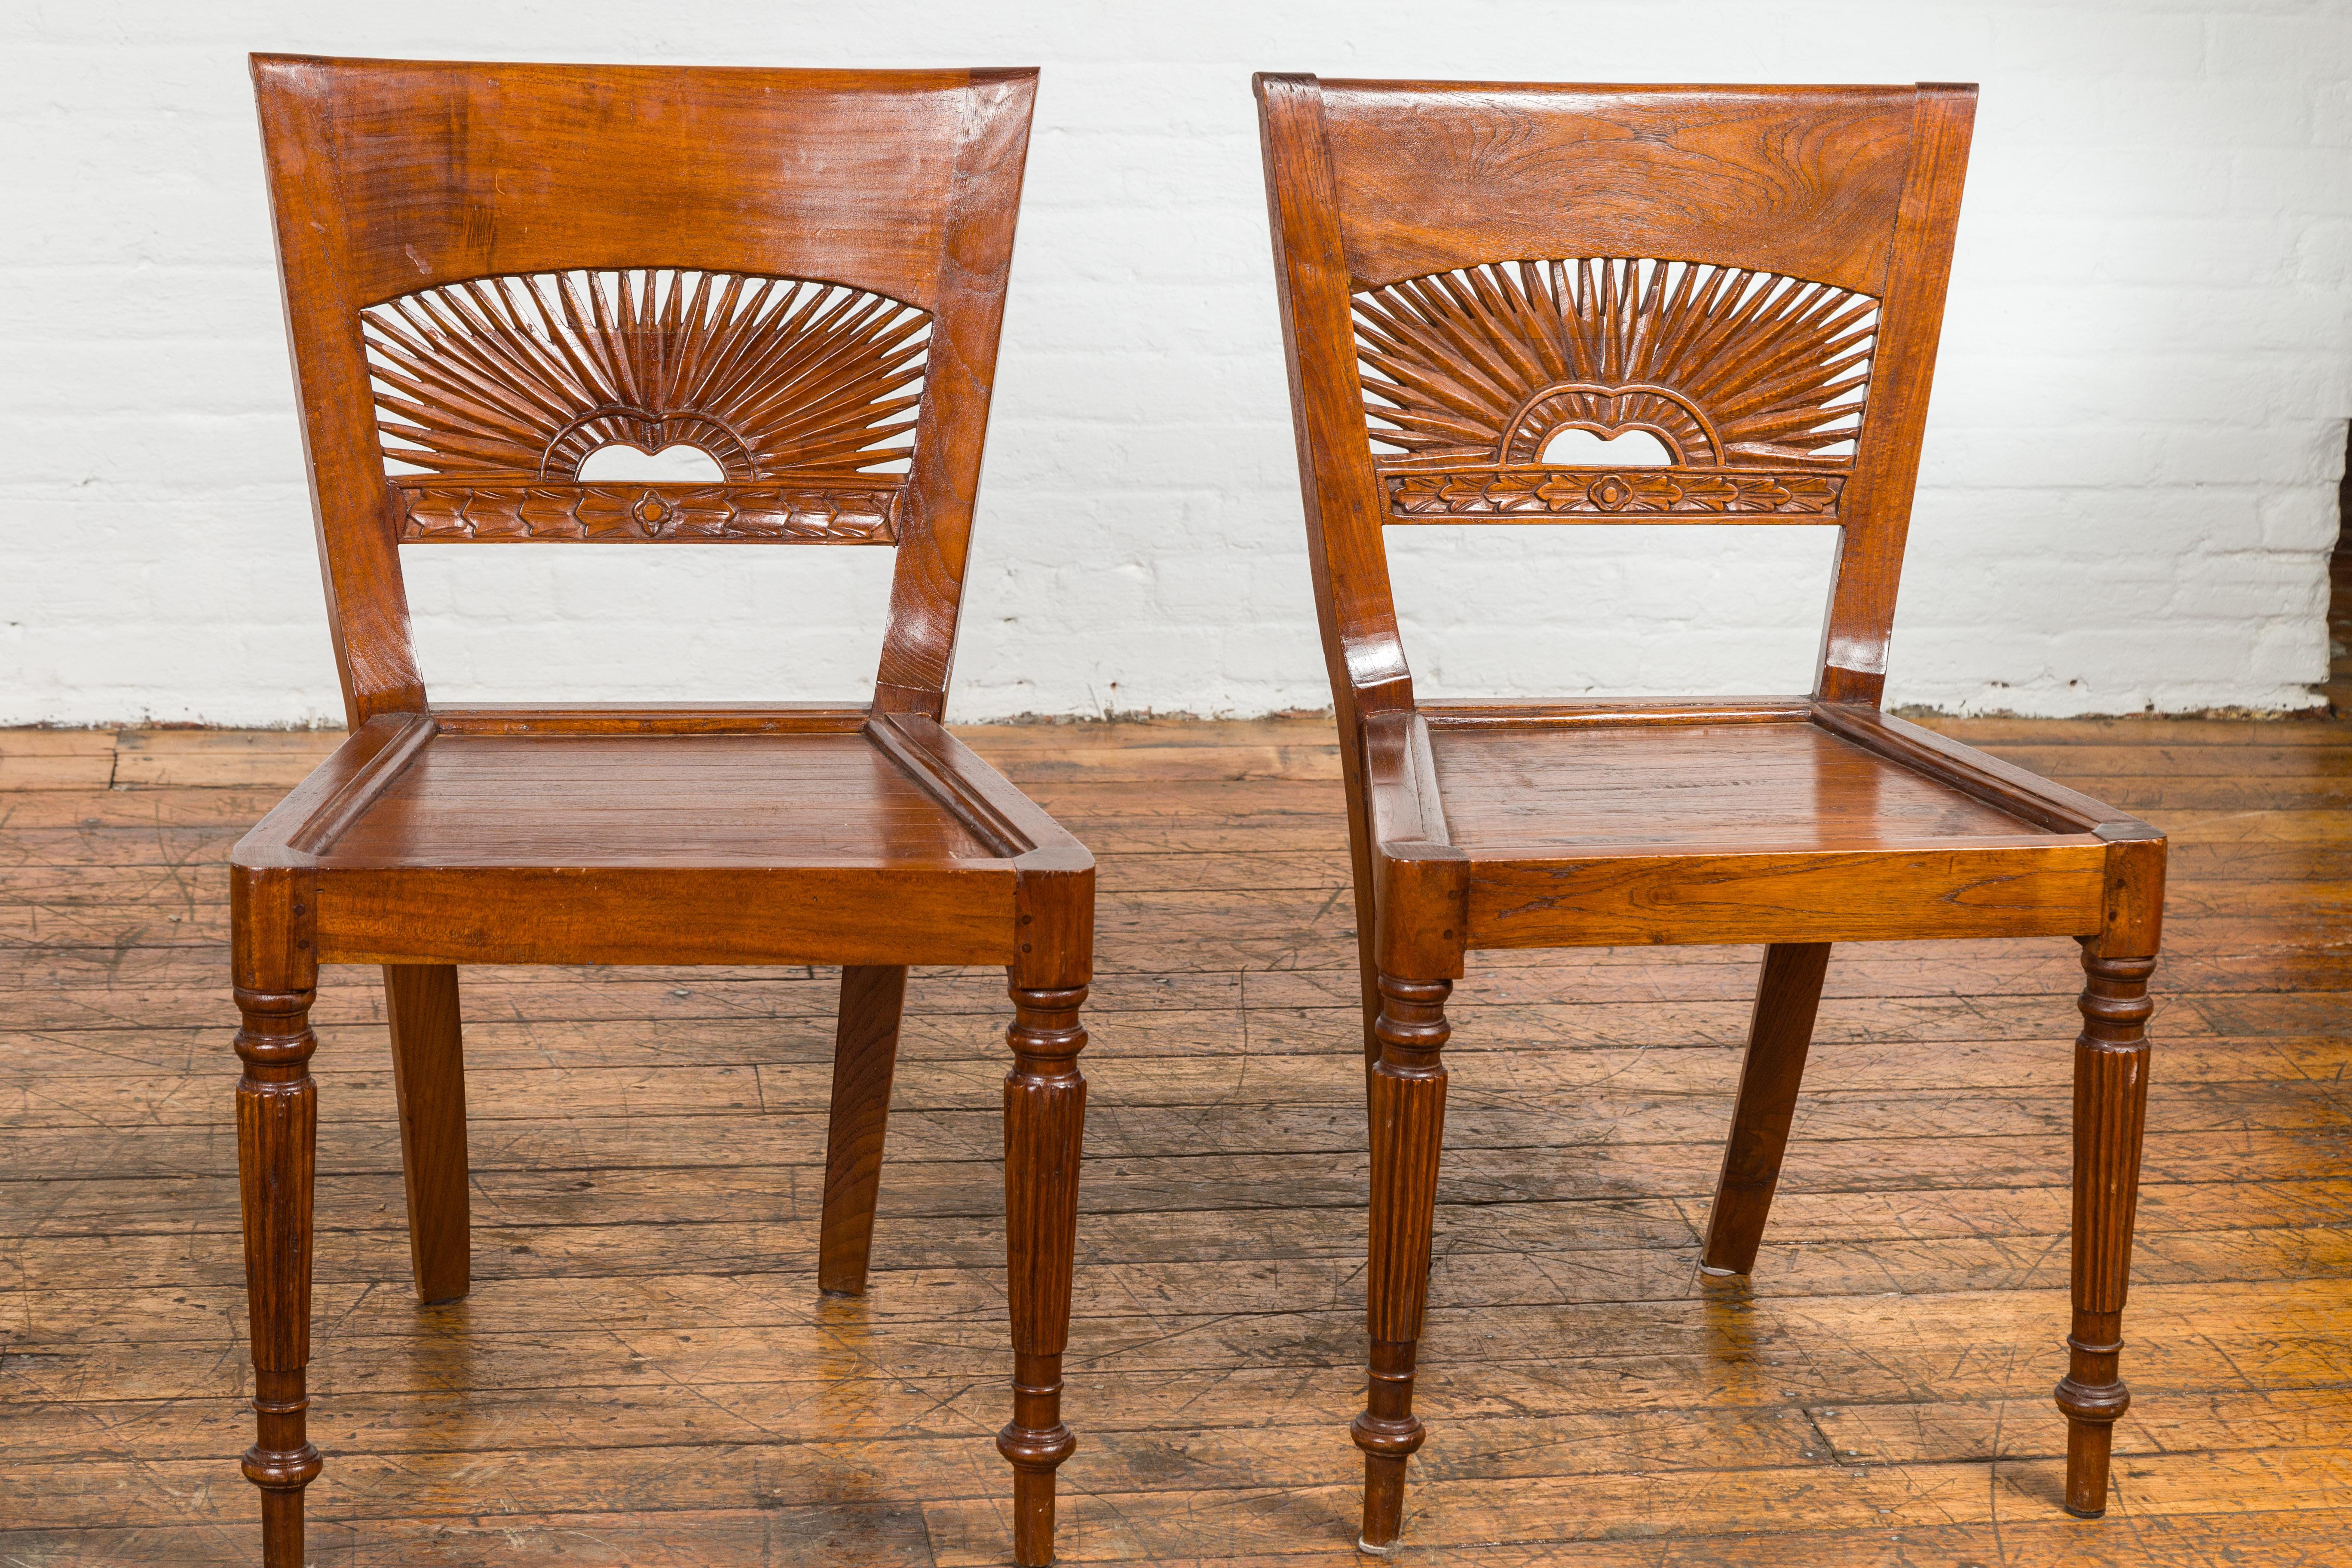 Dutch Colonial Teak Dining Room Chairs with Carved Radiating Backs, Set of Six For Sale 7